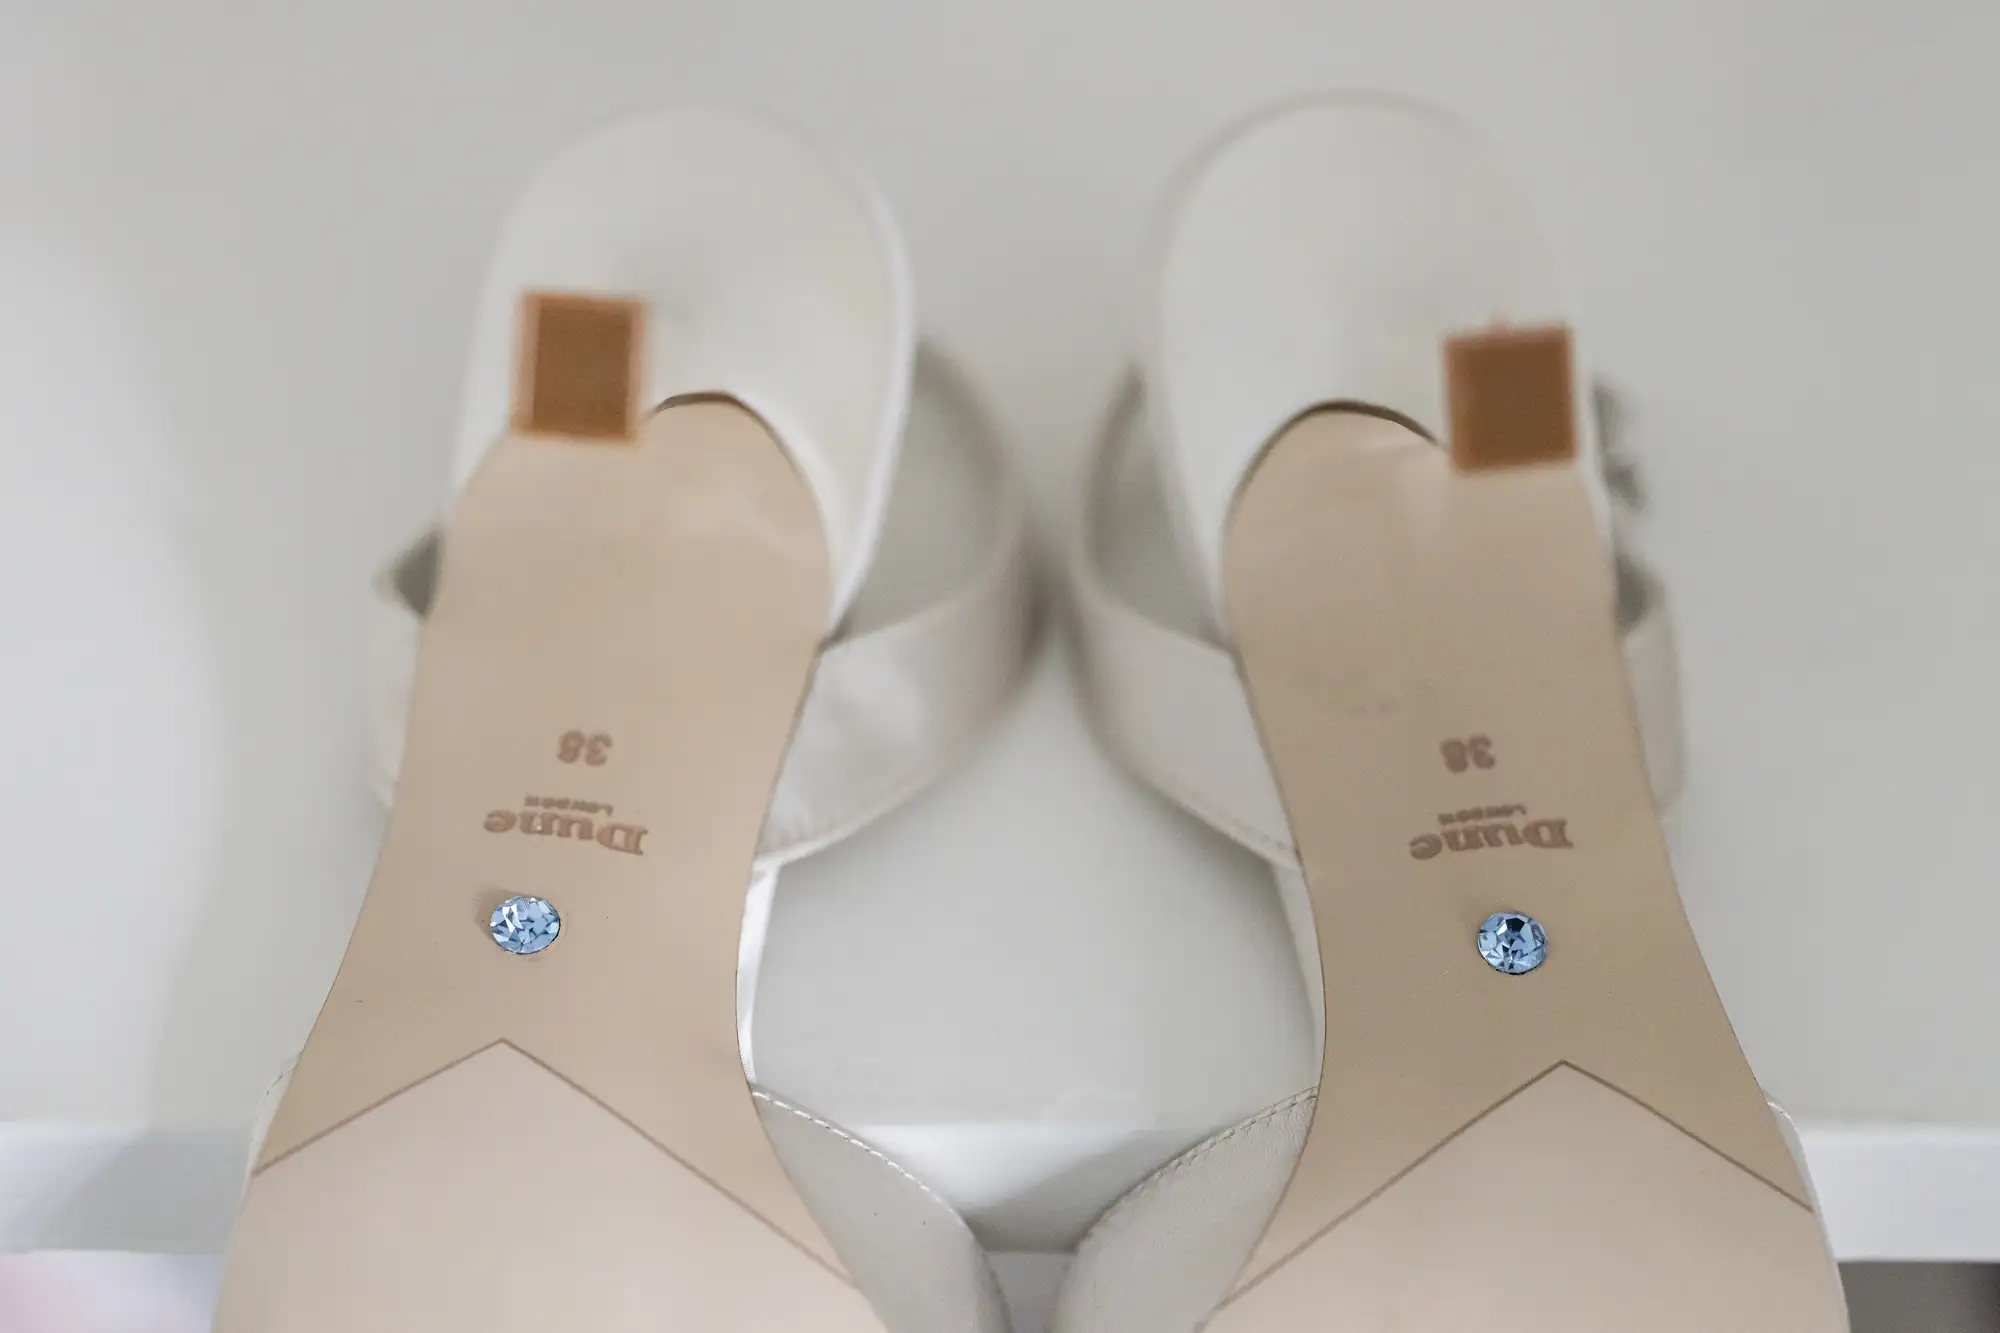 A pair of new white sandals with brown straps and blue crystal embellishments on the insoles, placed on a white surface.